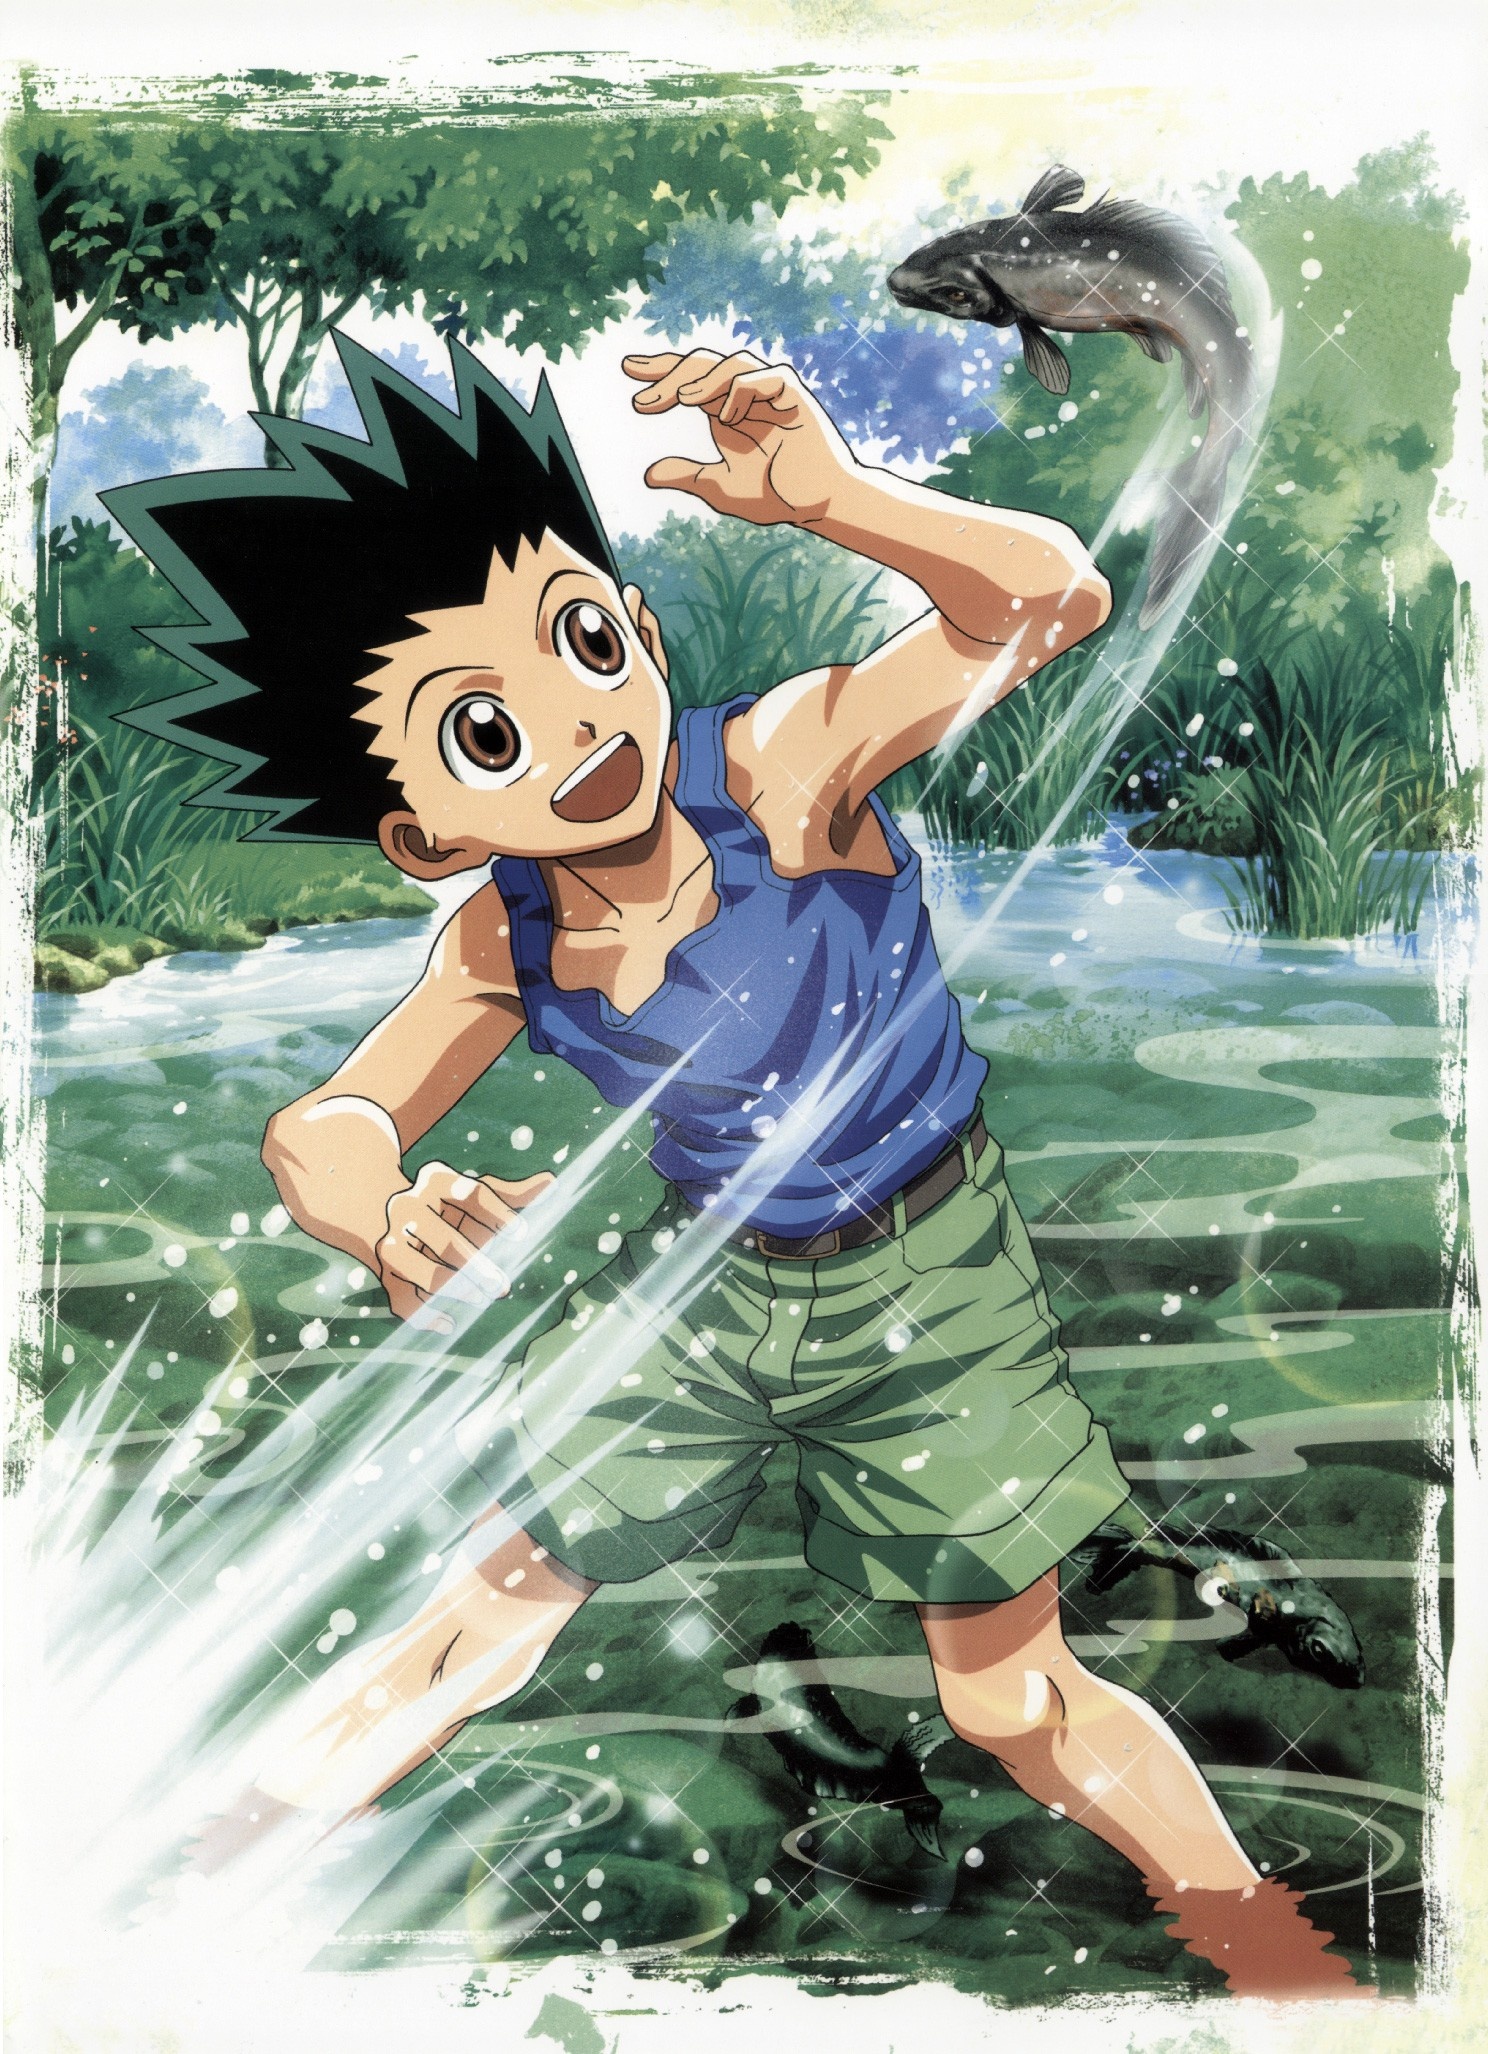 Gon Freecss: Hunter x Hunter, Anime character wearing green shorts, An athletic, rustic, and friendly boy. 1490x2060 HD Wallpaper.